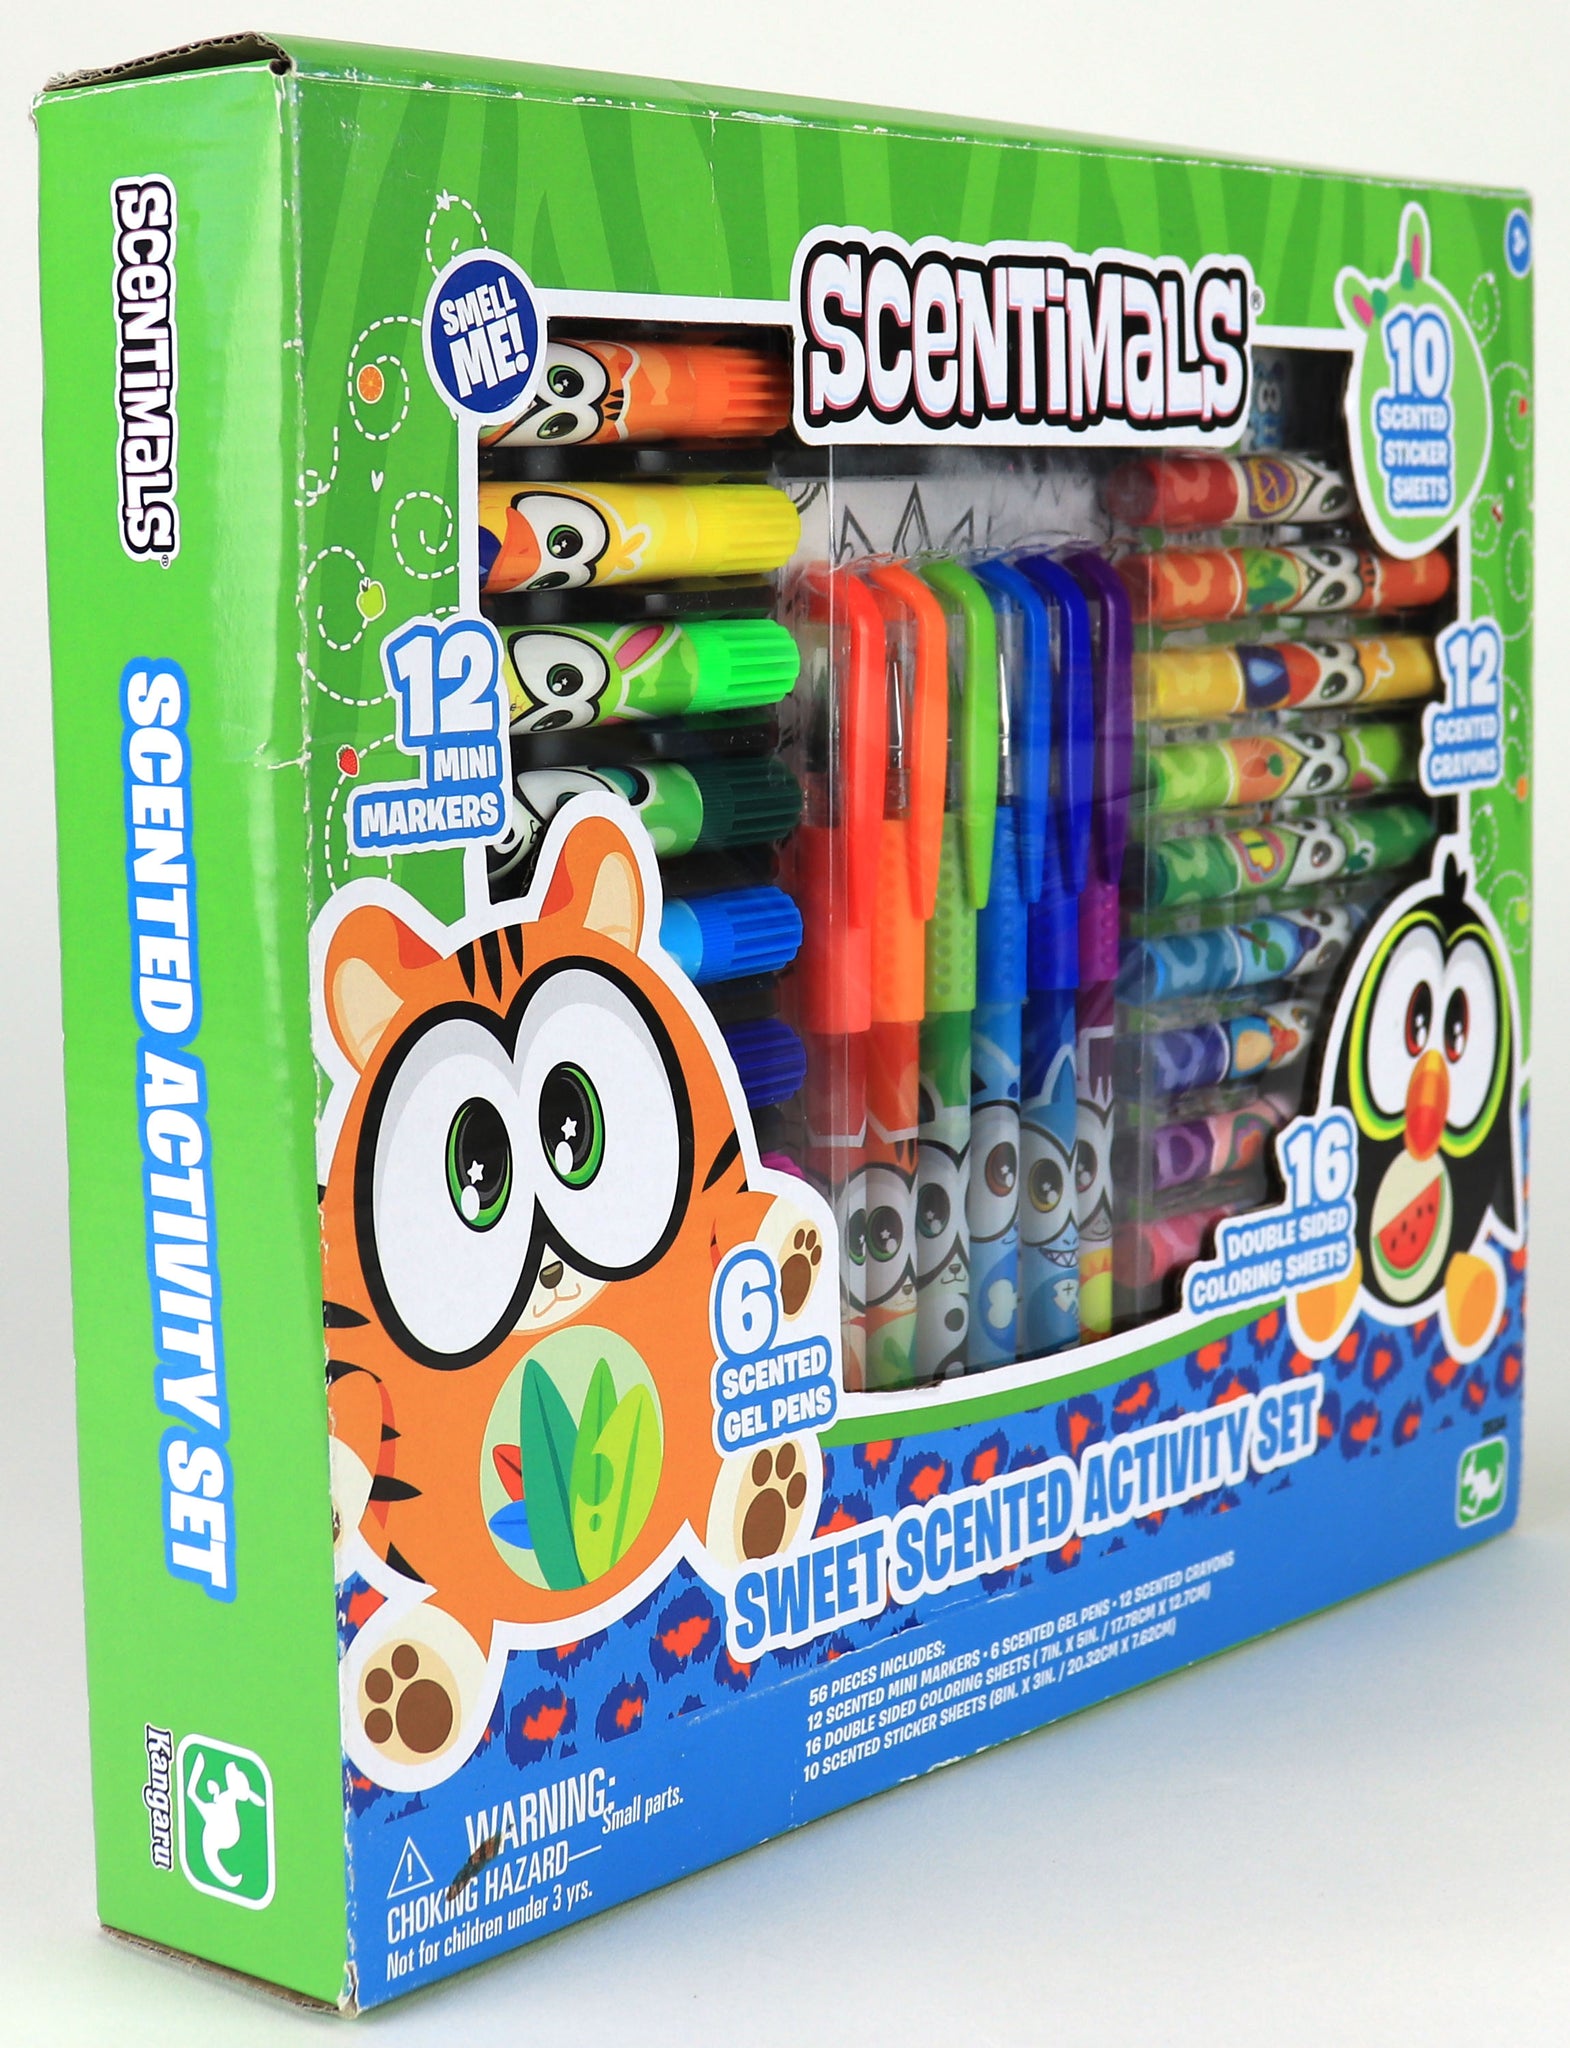 Scenticorns art supplies, coloring set, drawing kit, book - scentimals